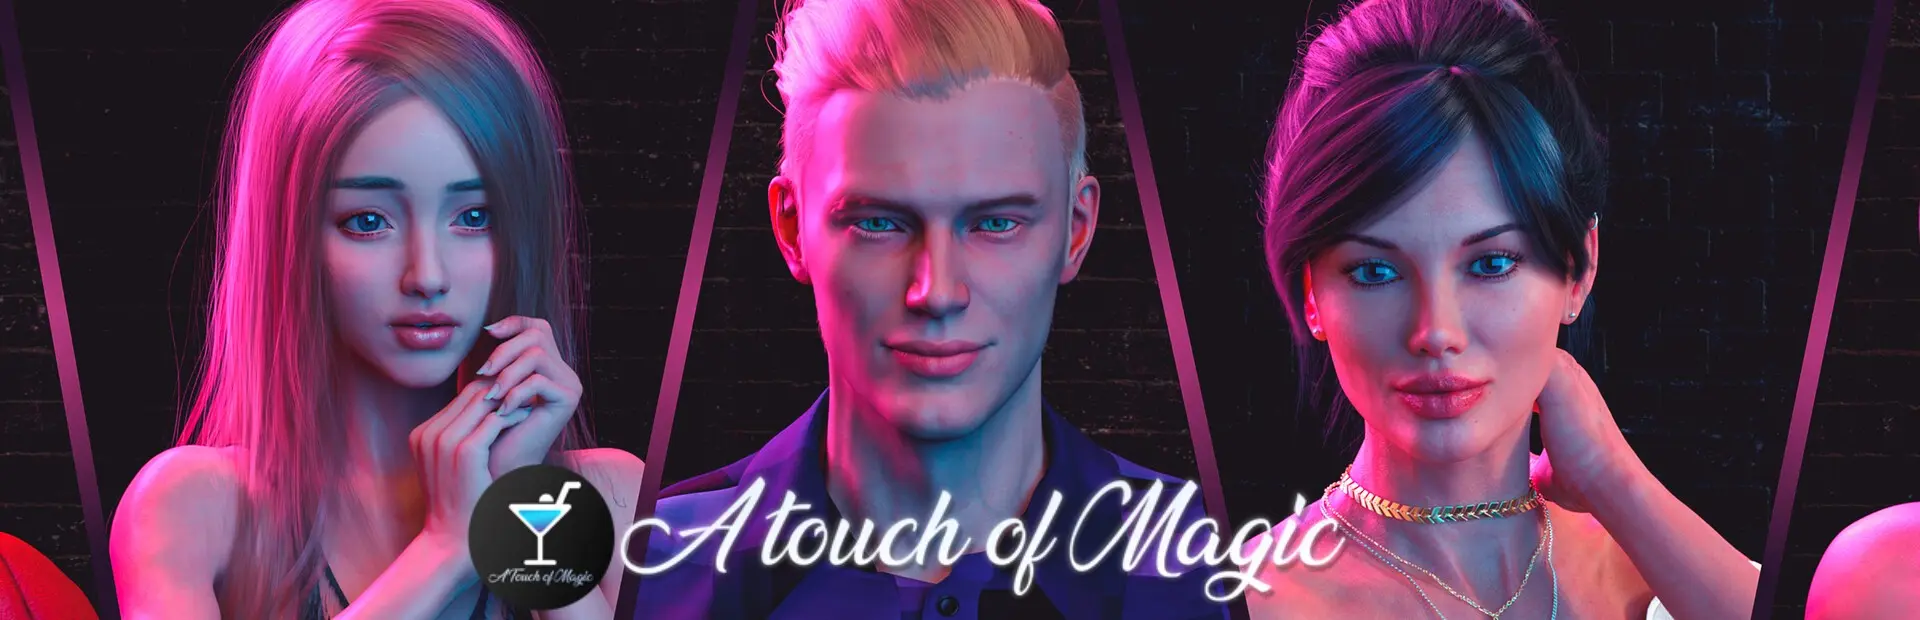 A Touch of Magic main image